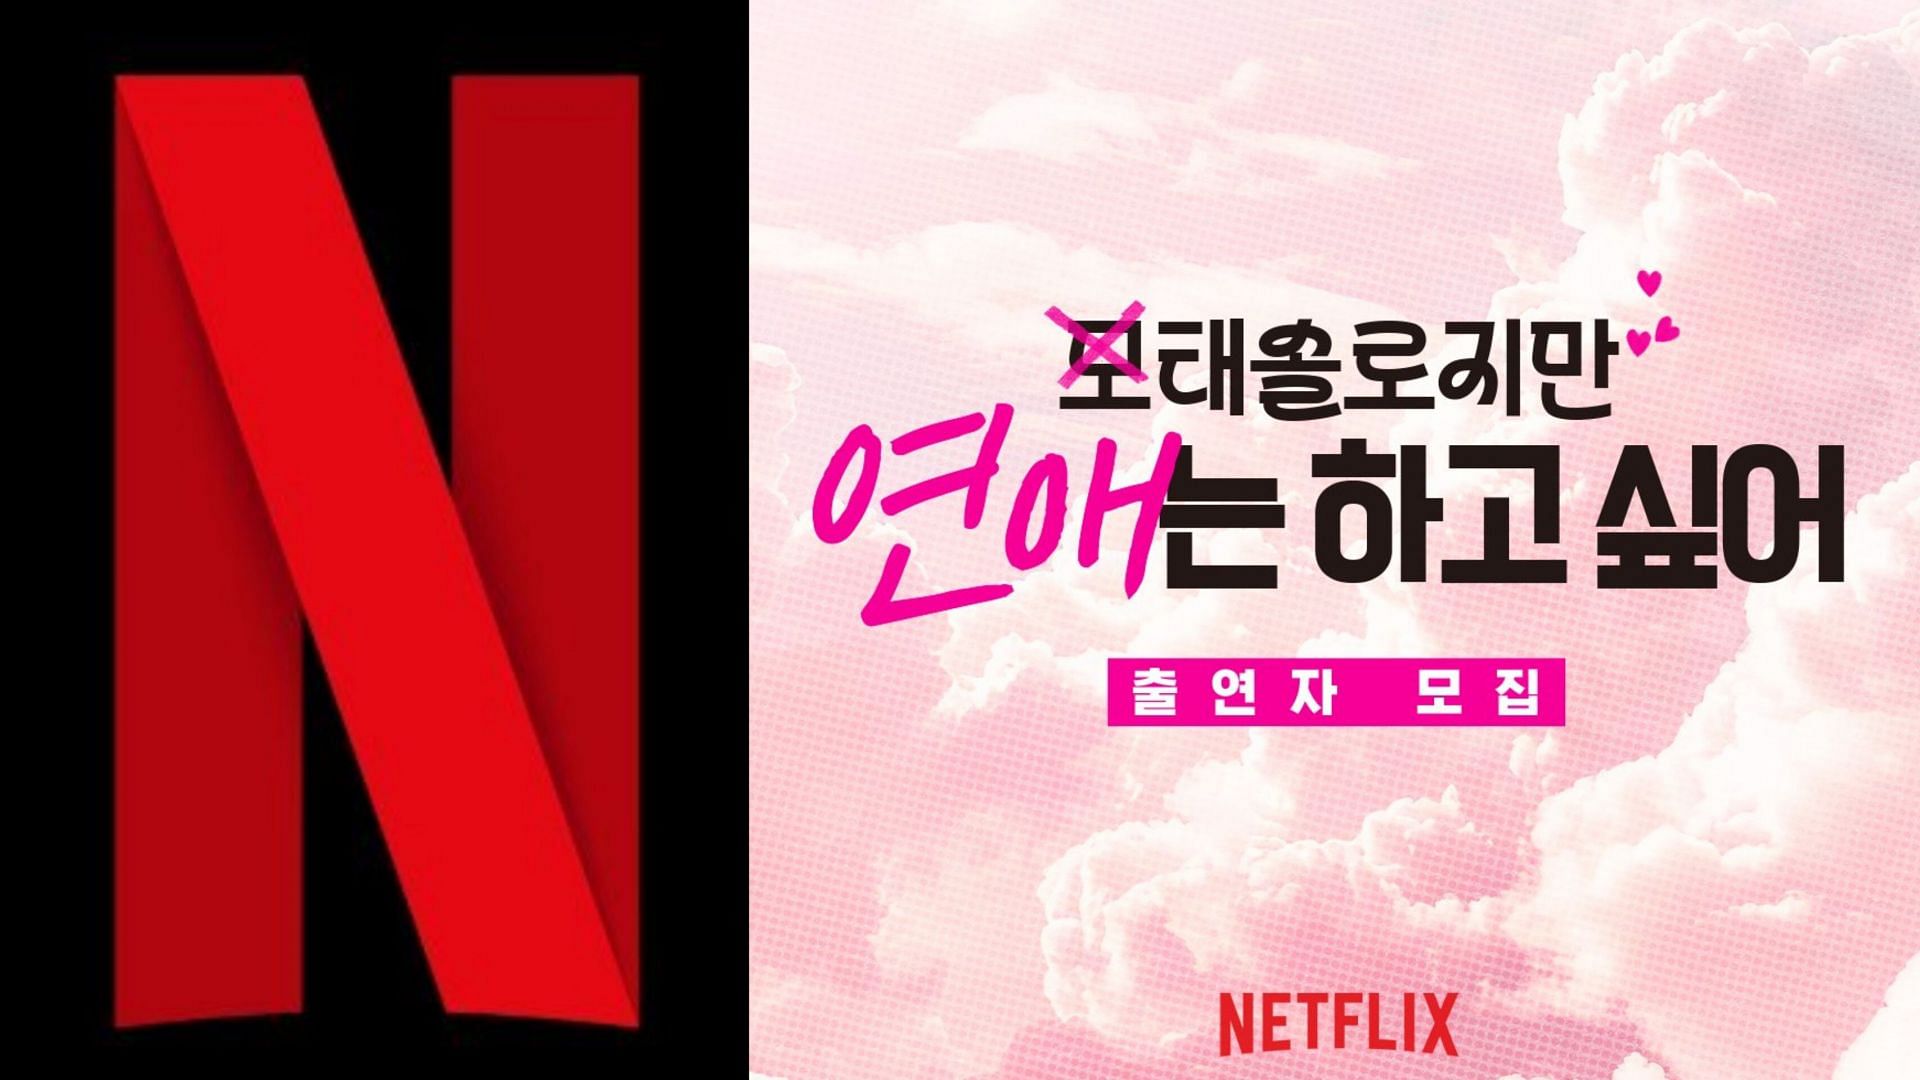 Netflix Korea to start casting for a new dating show (Images via X/@NetflixKR)